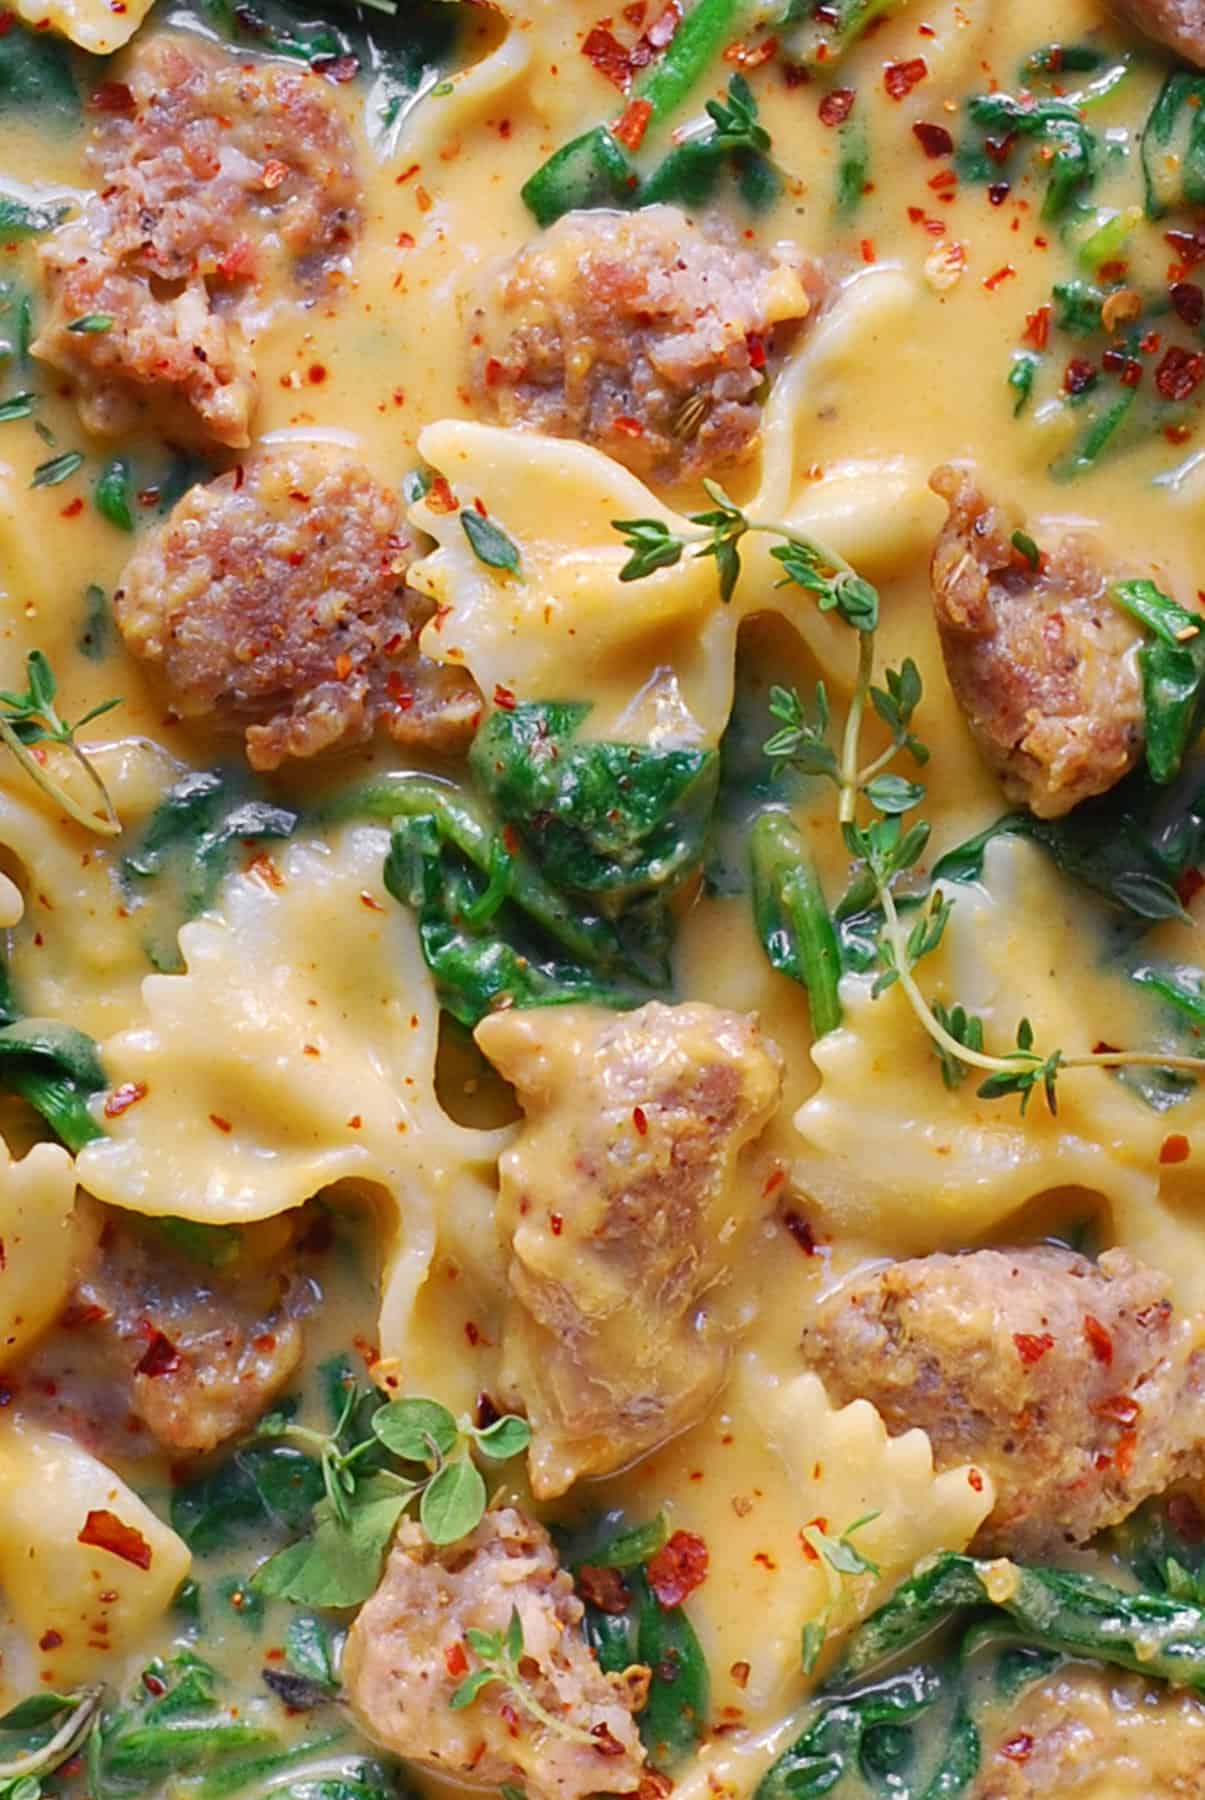 Creamy Butternut Squash Italian Sausage Bow-Tie Pasta with Spinach (close-up photo).